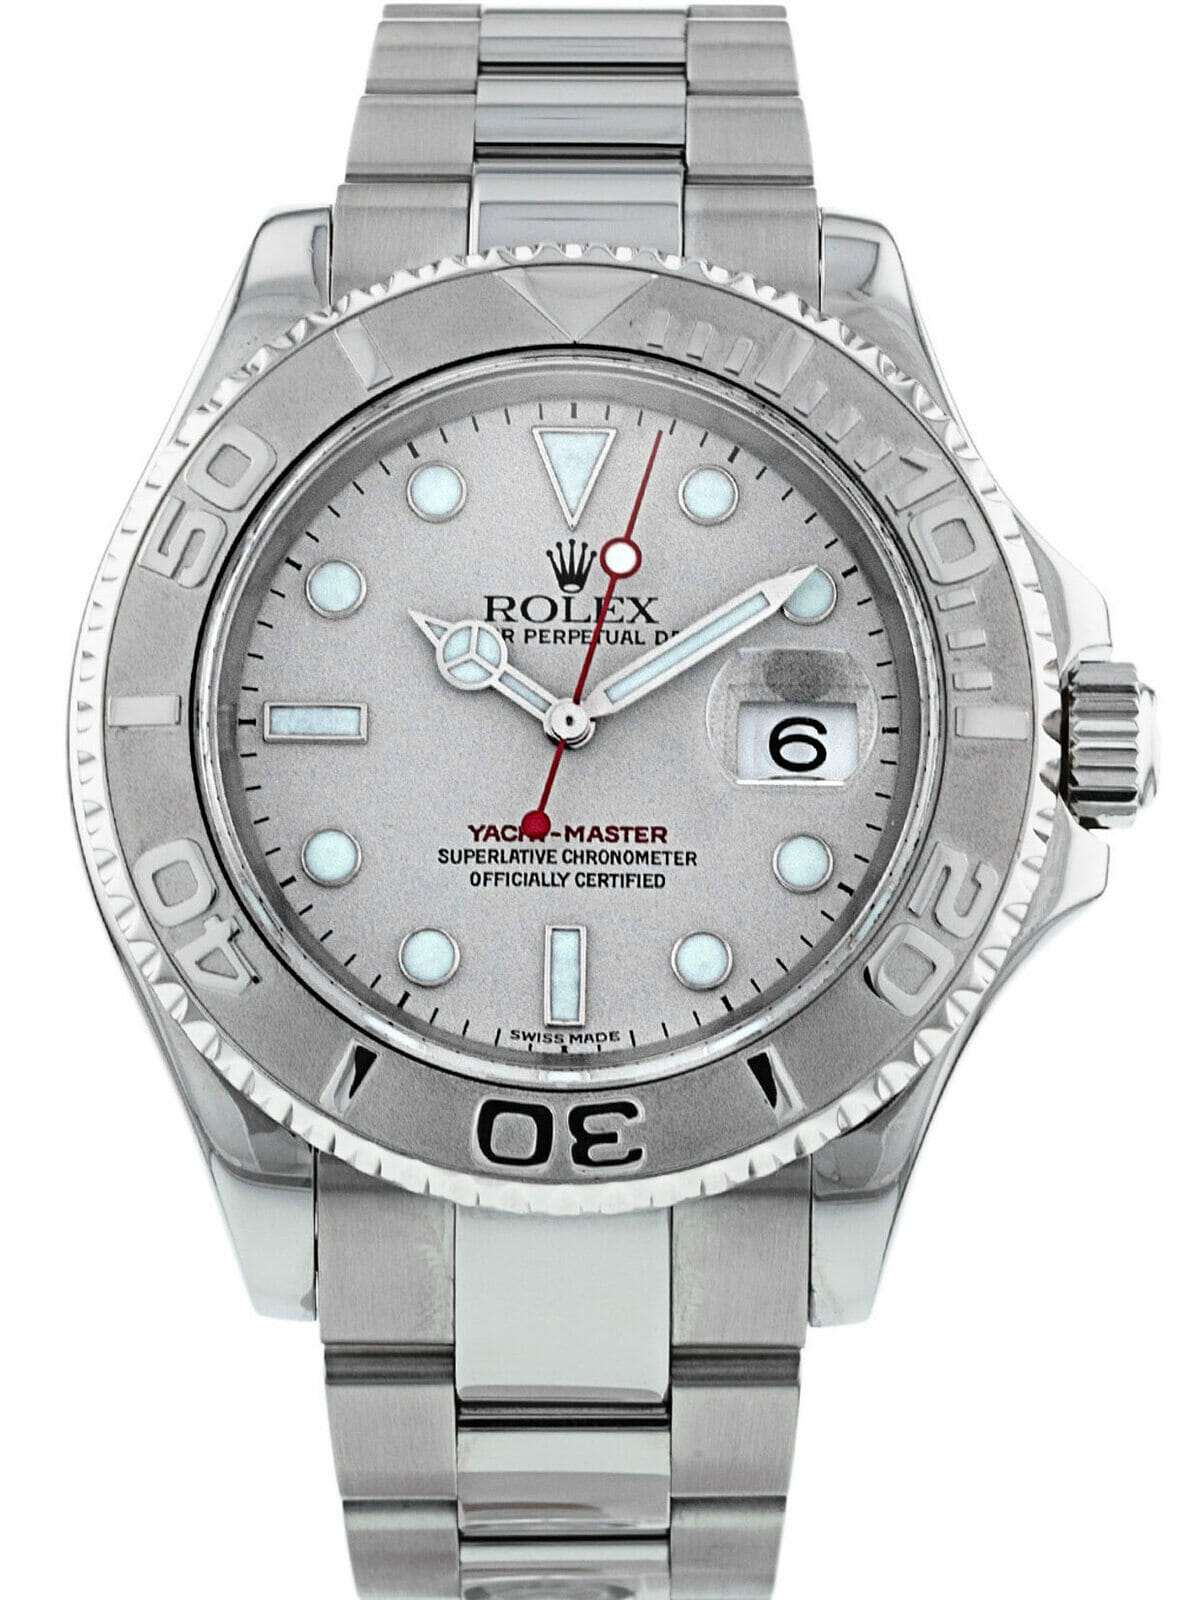 yachtmaster in platinum